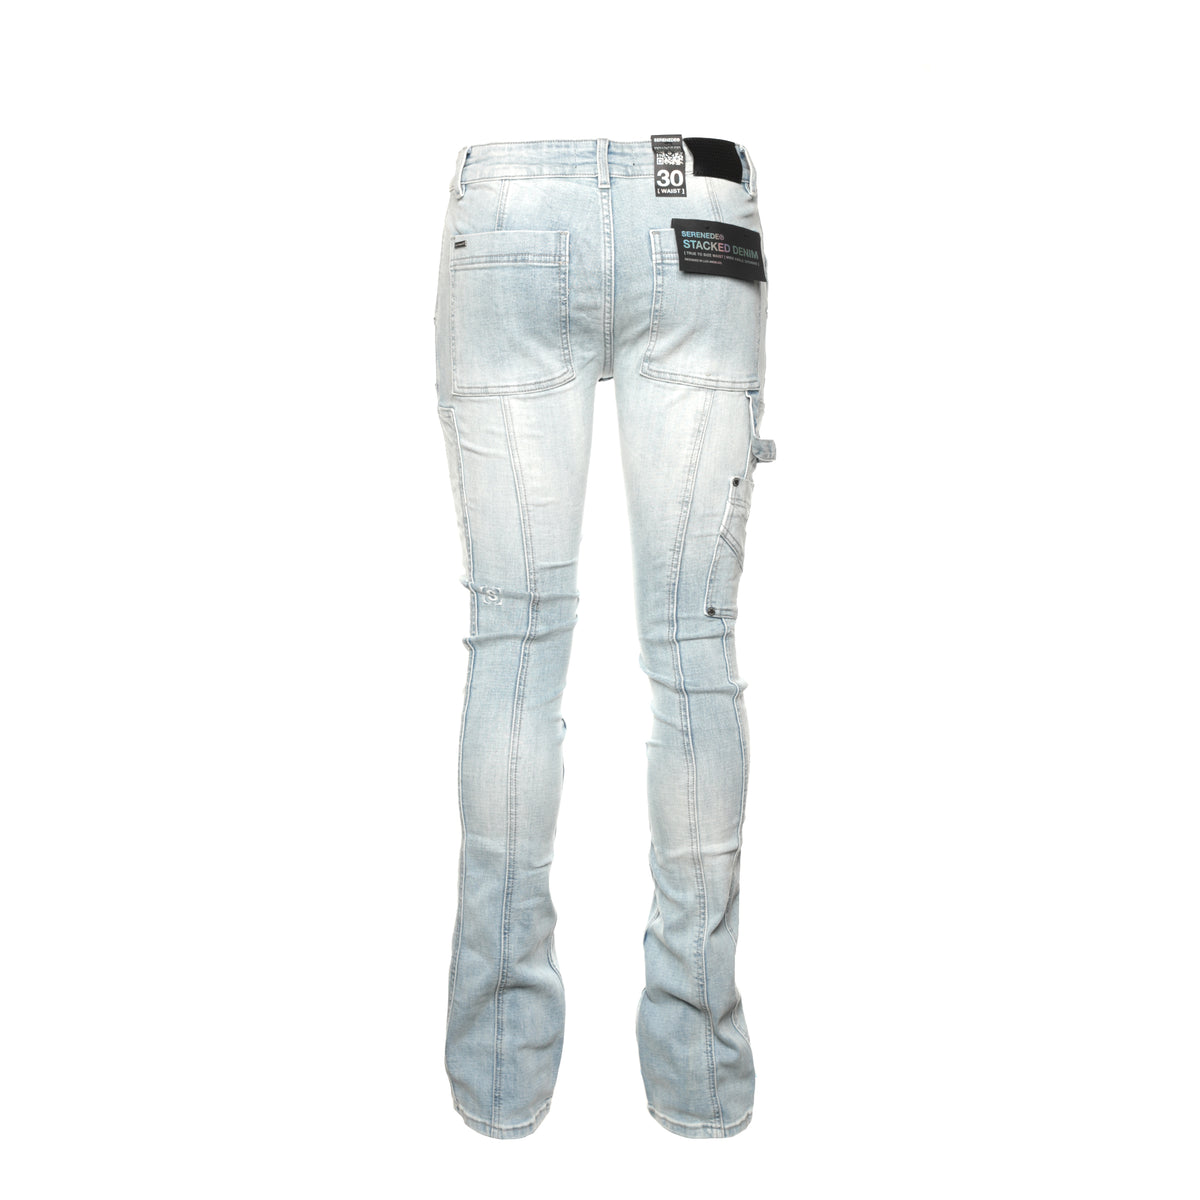 Serenede "Sky" Men's Stacked Jeans - SIZE Boutique